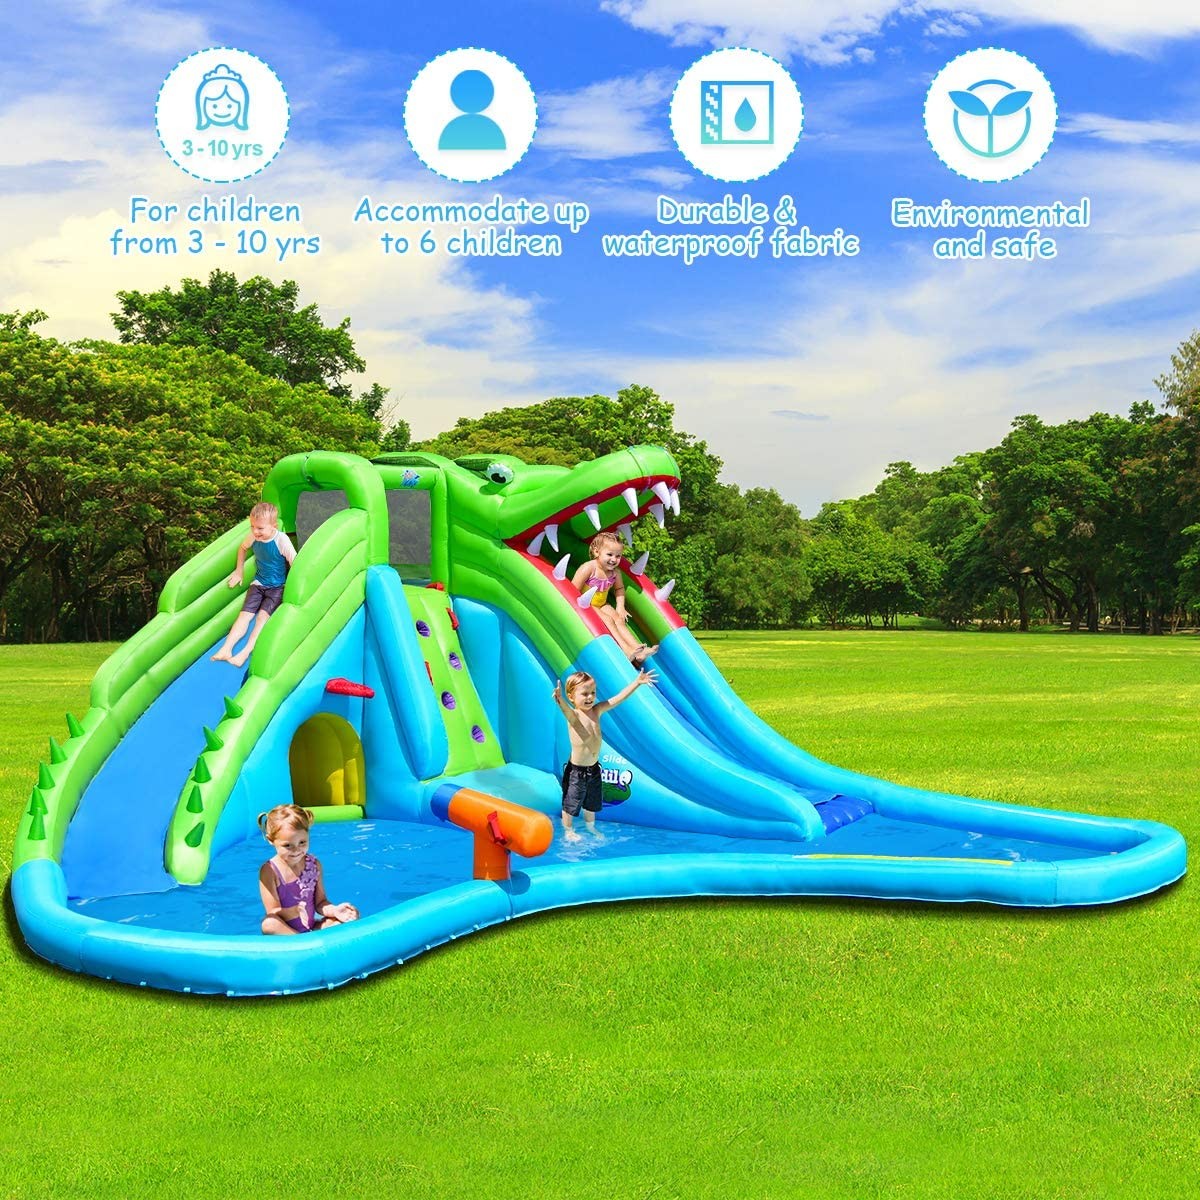 Costzon Inflatable Water Park, Giant 7 in 1 Crocodile Bounce House w/Two Water Slides, Climb Wall